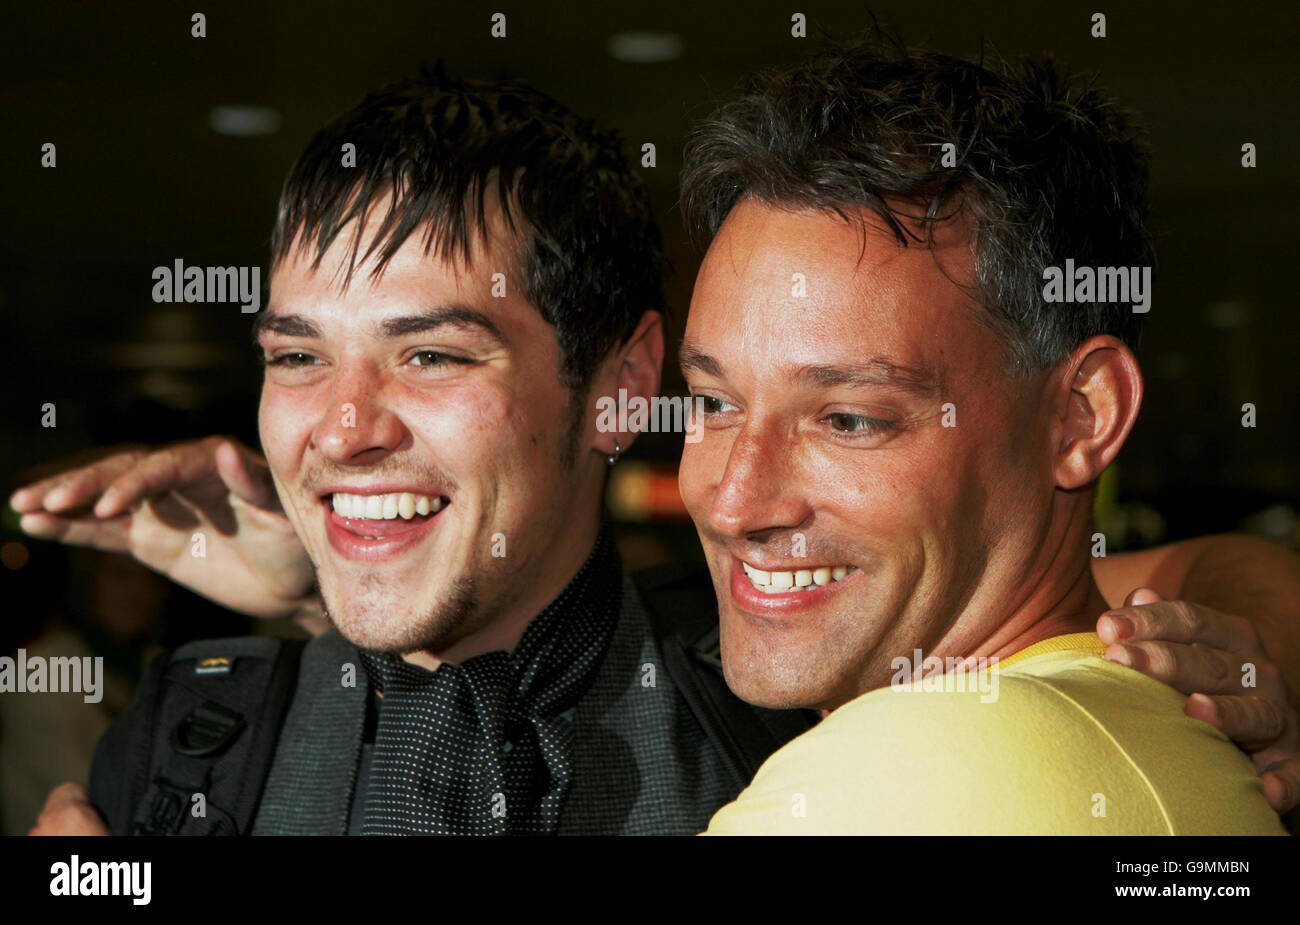 King of the Jungle Matt Wills and fellow contestant Toby Anstis arrive at Heathrow Airport after Willis won the game show ' I am a Celebrity...Get Me Out Of Here'. PRESS ASSOCIATION Photo. Stock Photo